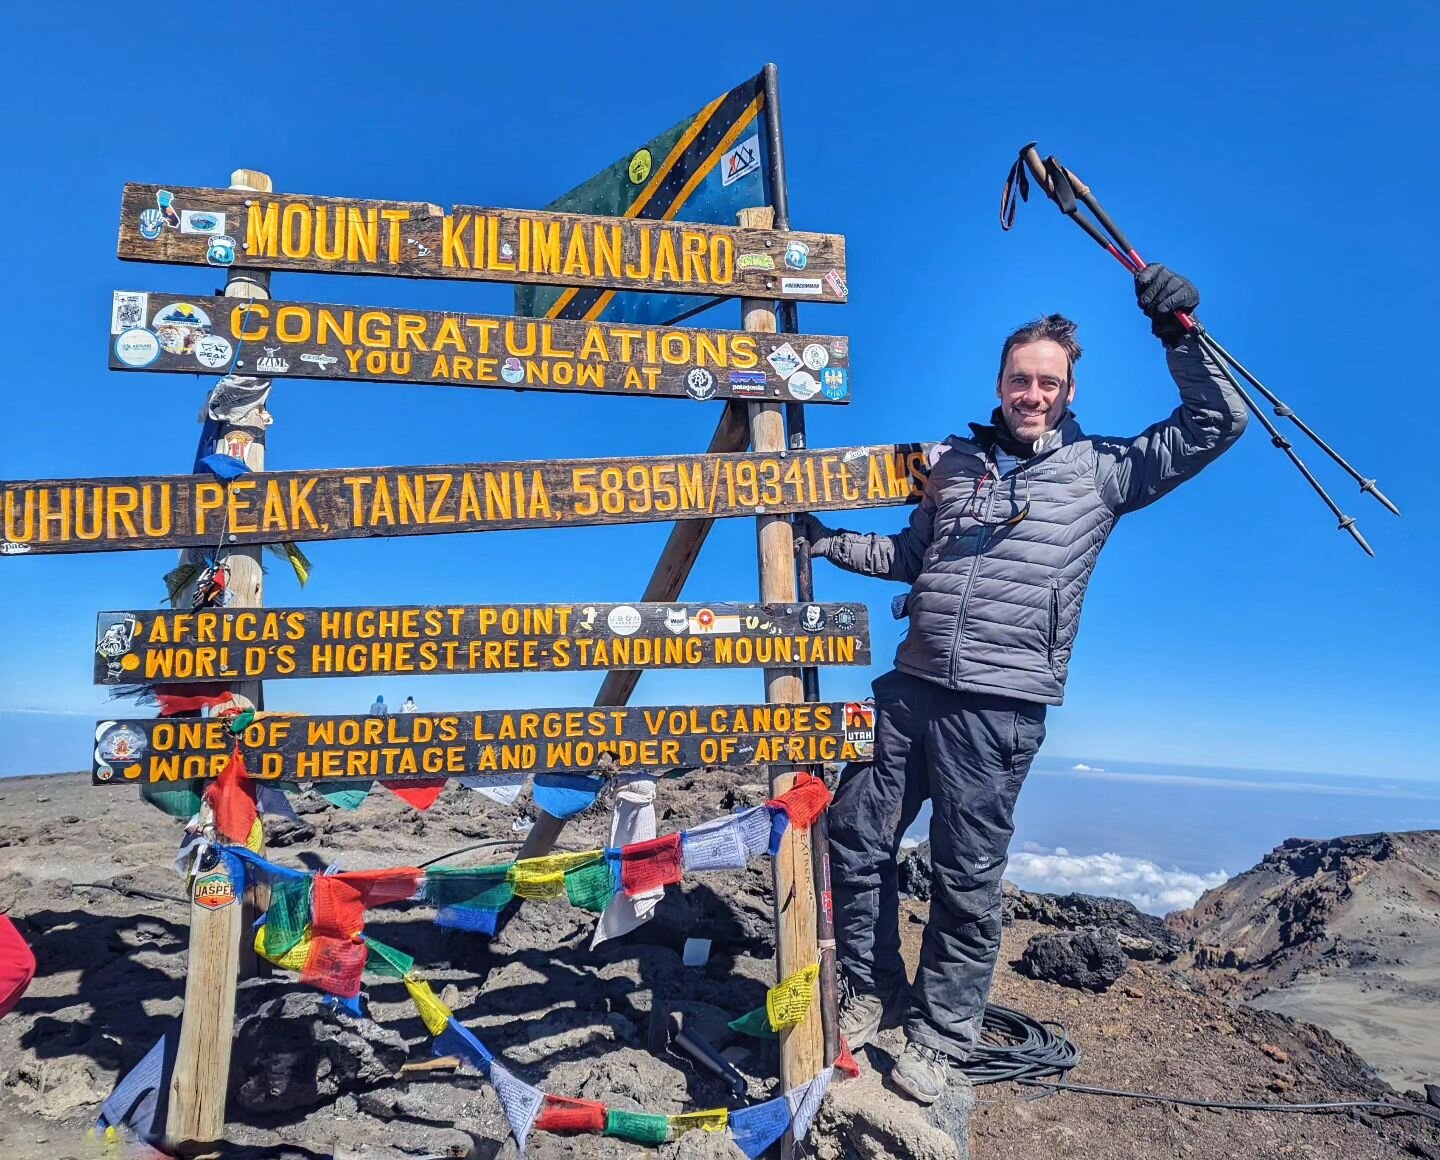 🏆🏔 Bucket List Achievement: Summited Mt. Kilimanjaro!
- 19,340 ft. (5,895m)
- World's highest free-standing mountain
- Highest point in Africa

Thank you @peak_planet for having our backs and making this an epic journey. 💯